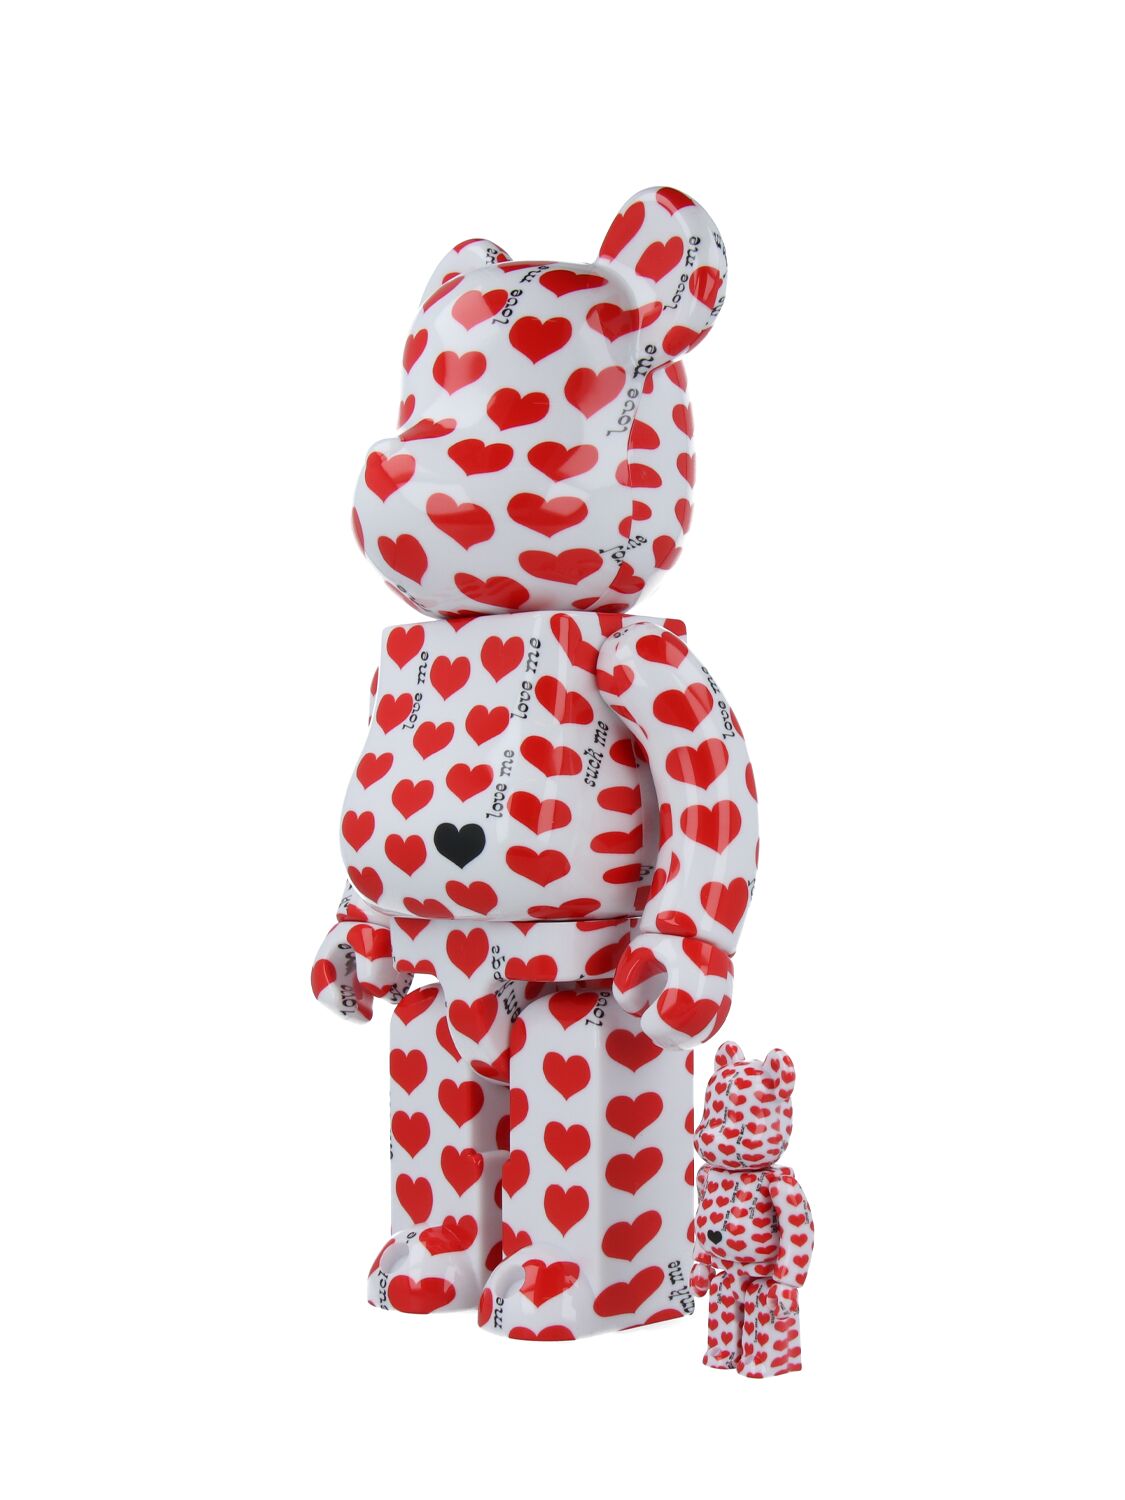 Shop Medicom Toy Bearbrick 100 White Heart Toys In Red